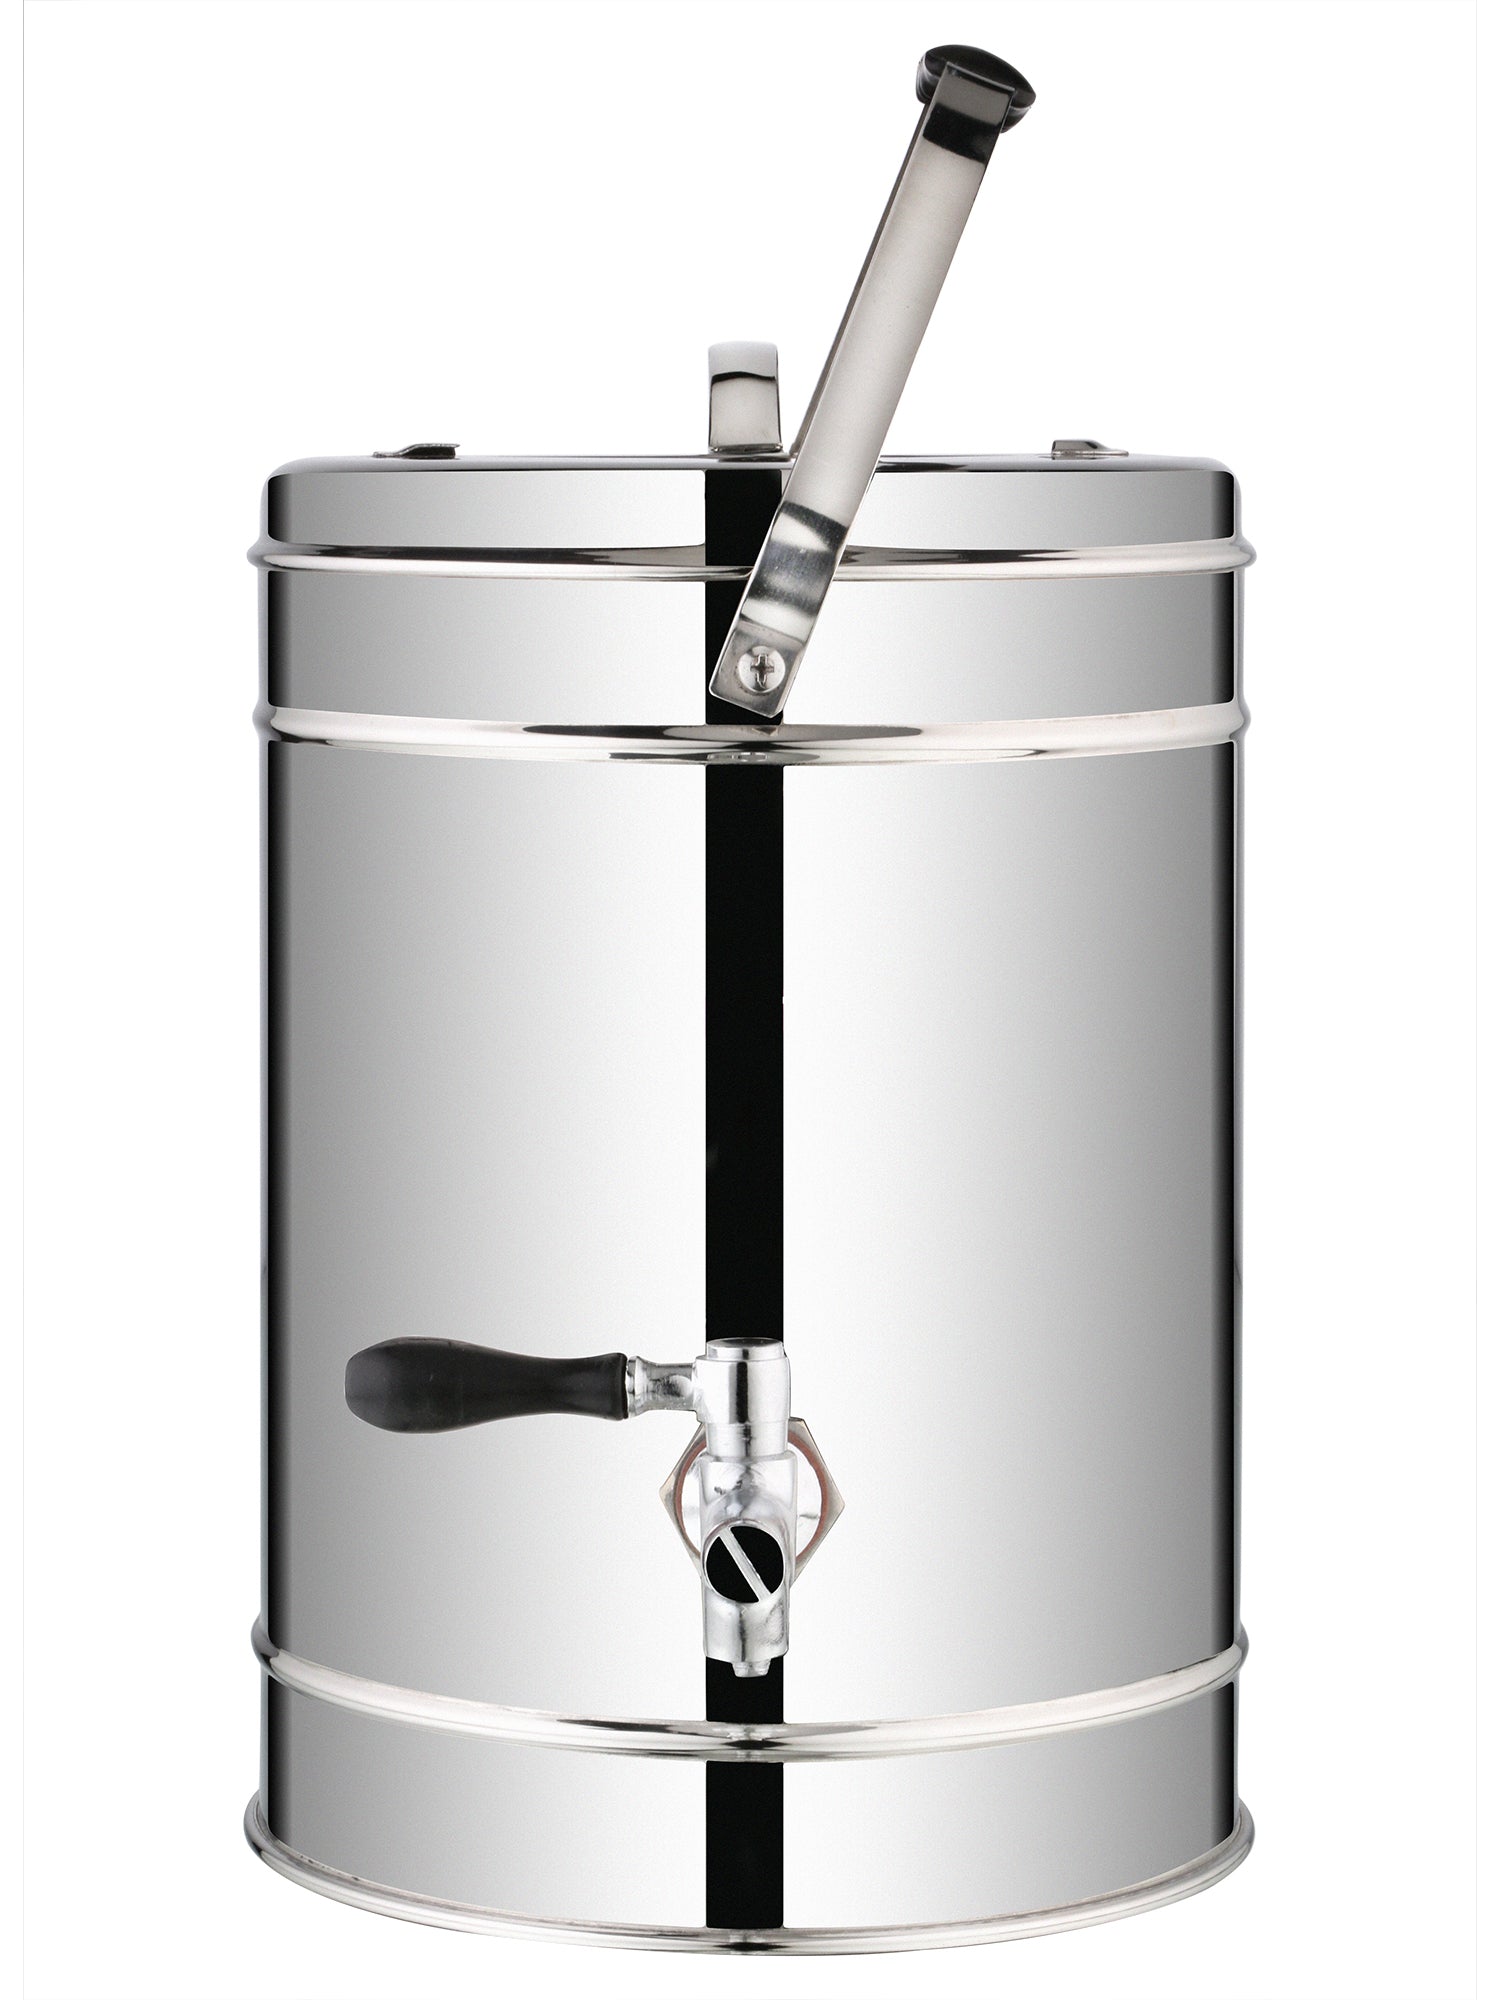 NanoNine T-Urn 7.5 L Double Wall Insulated Stainless- Steel Tea Pot.